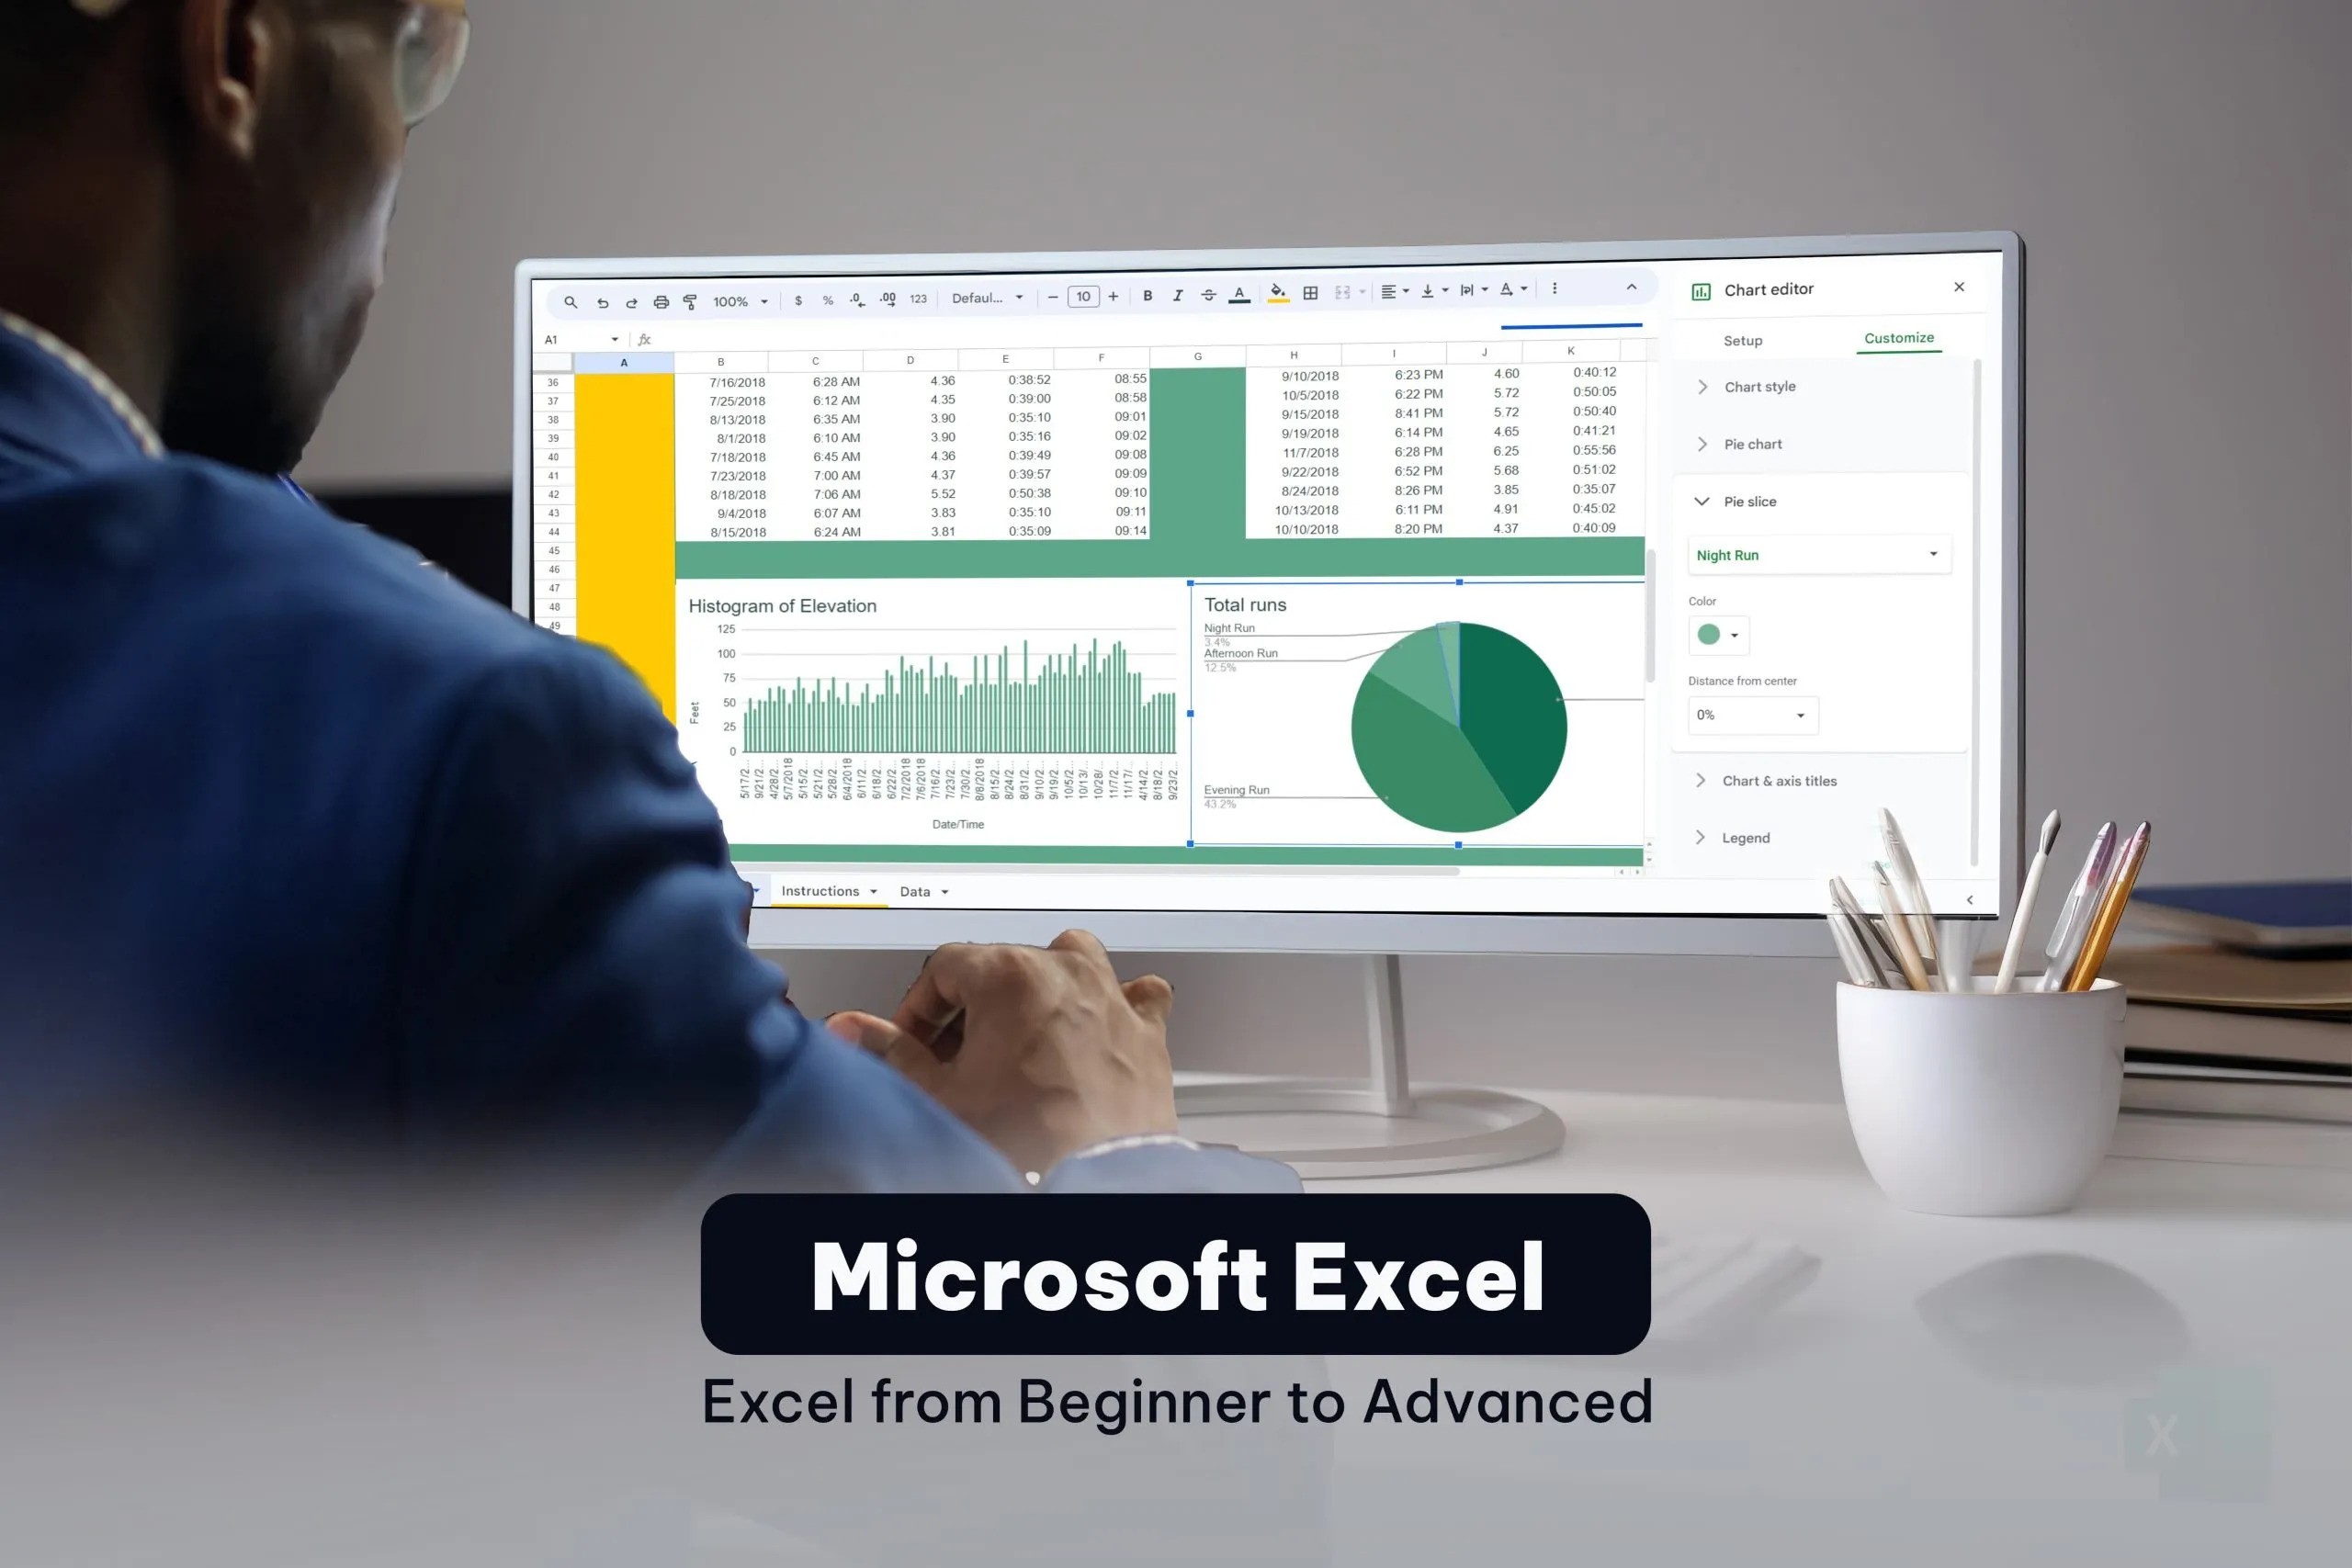 Microsoft Excel – from Beginner to Advanced